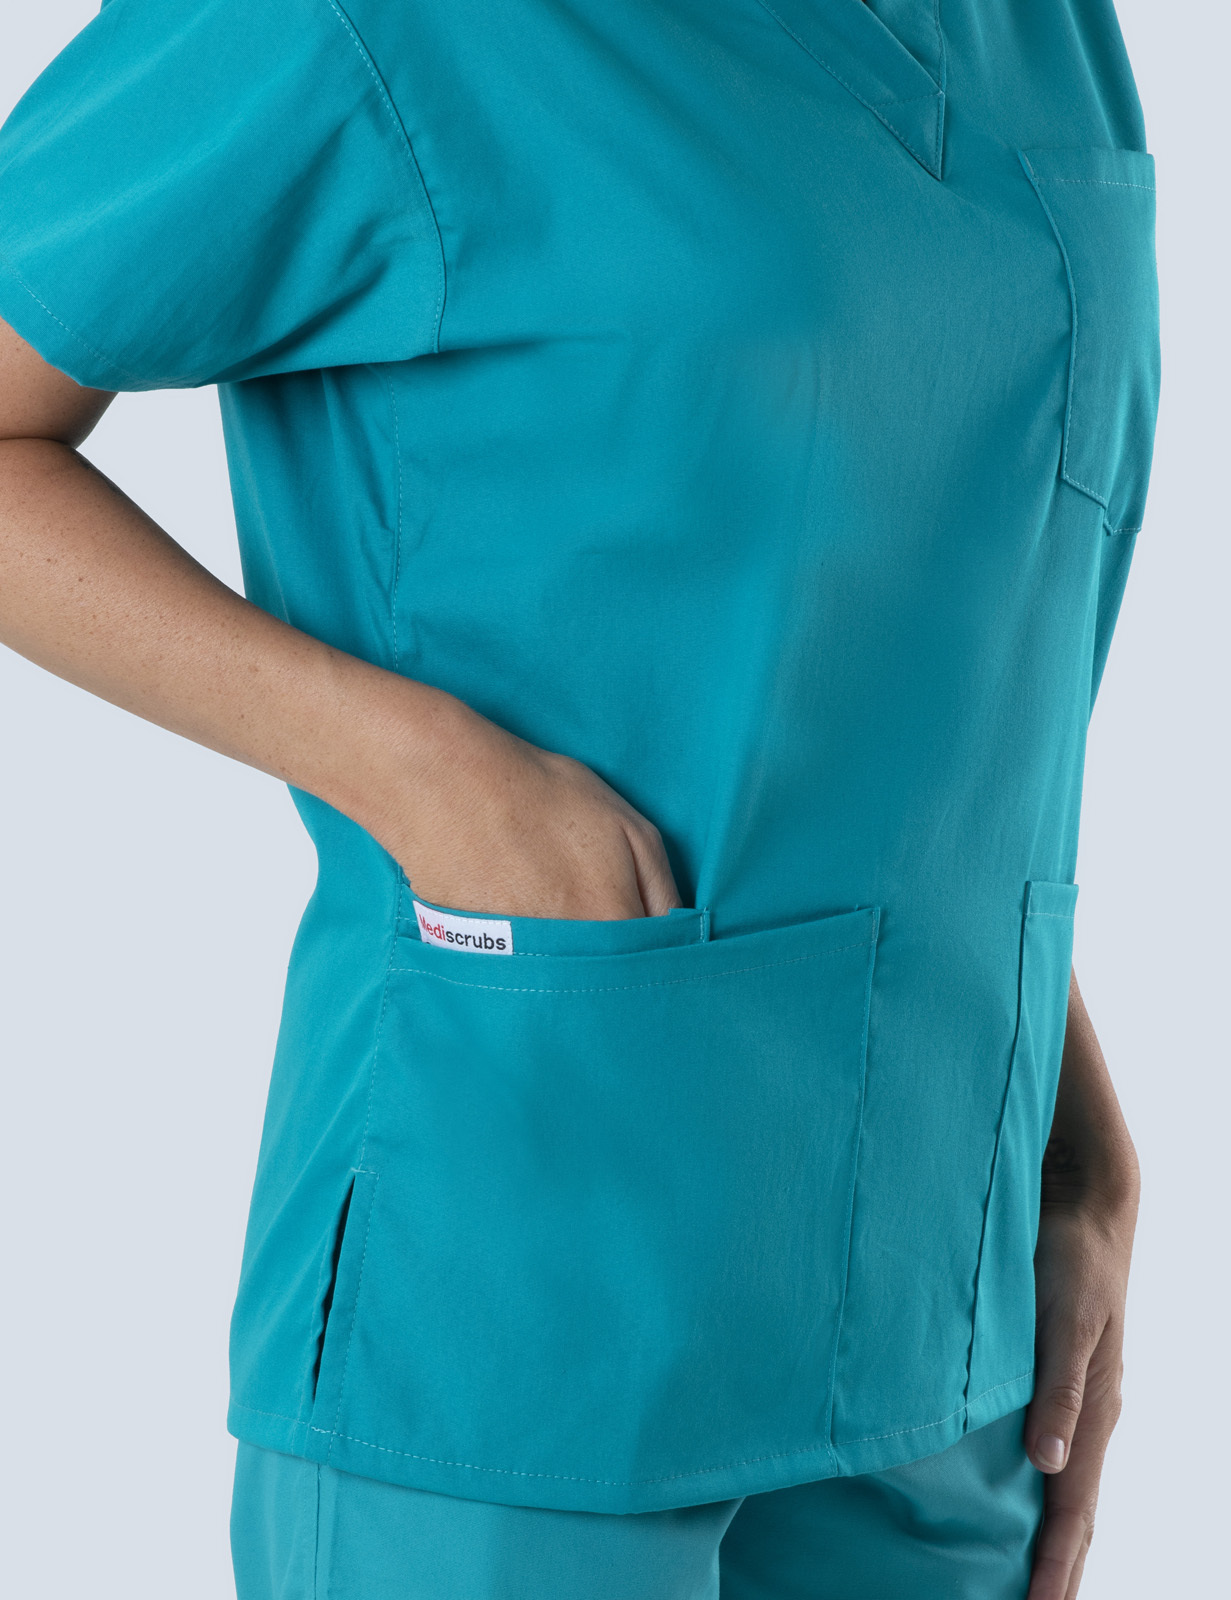 Gold Coast University Hospital - Midwife (4 Pocket Scrub Top and Cargo Pants in Teal incl Logos)